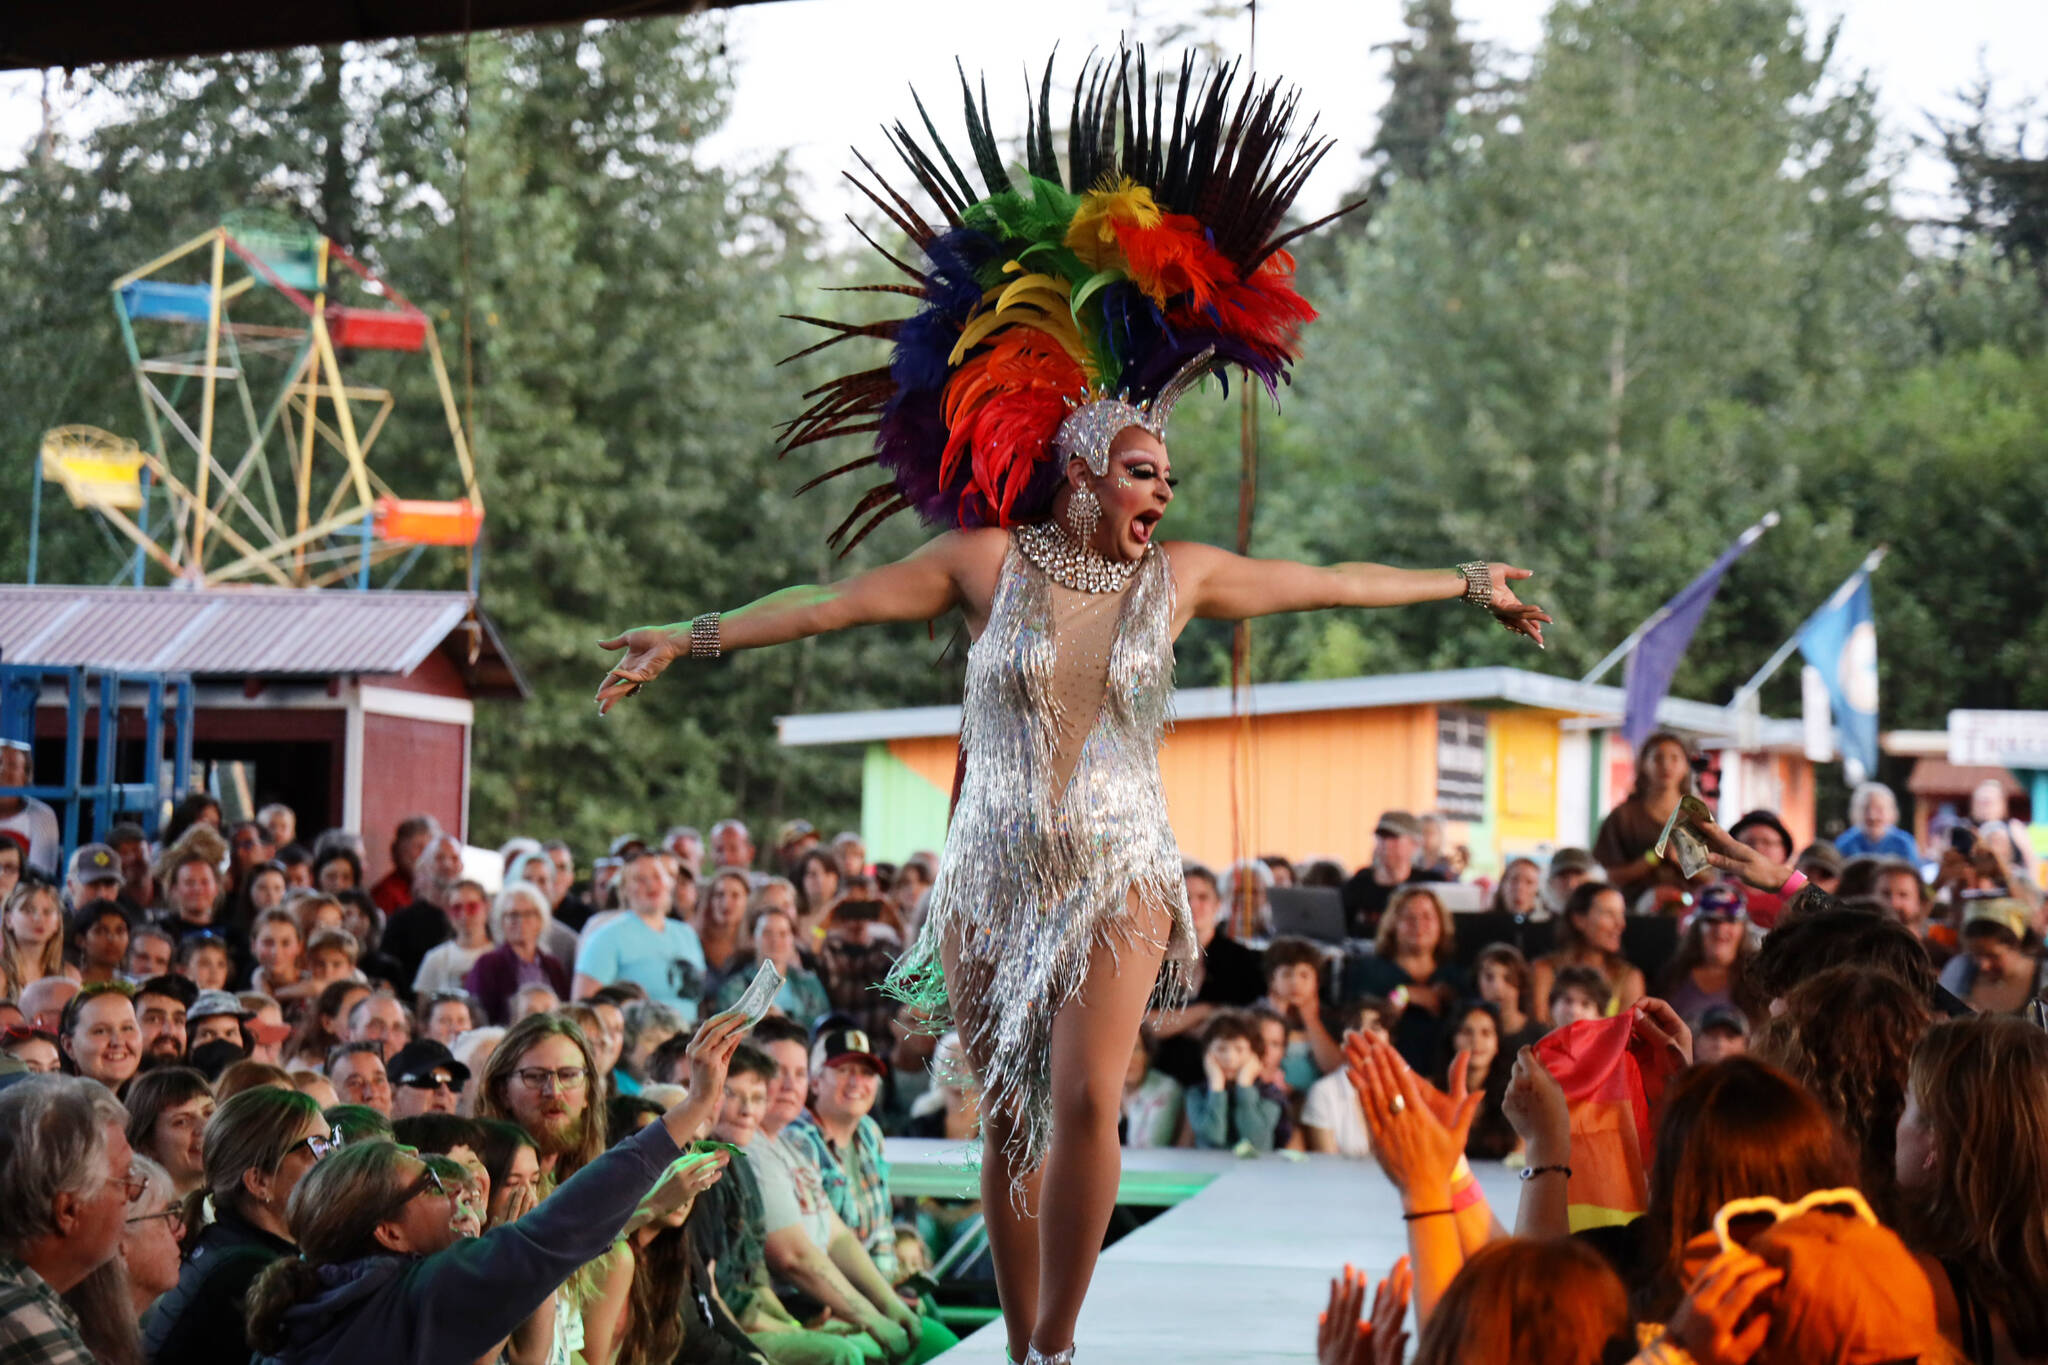 Juneau Drag performer and event emcee Gigi Monroe struts the runway in front of hundreds gathered at the main stage of the Southeast Alaska State Fair in Haines on Friday evening for the performance group’s debut show at the fair. (Clarise Larson / Juneau Empire)